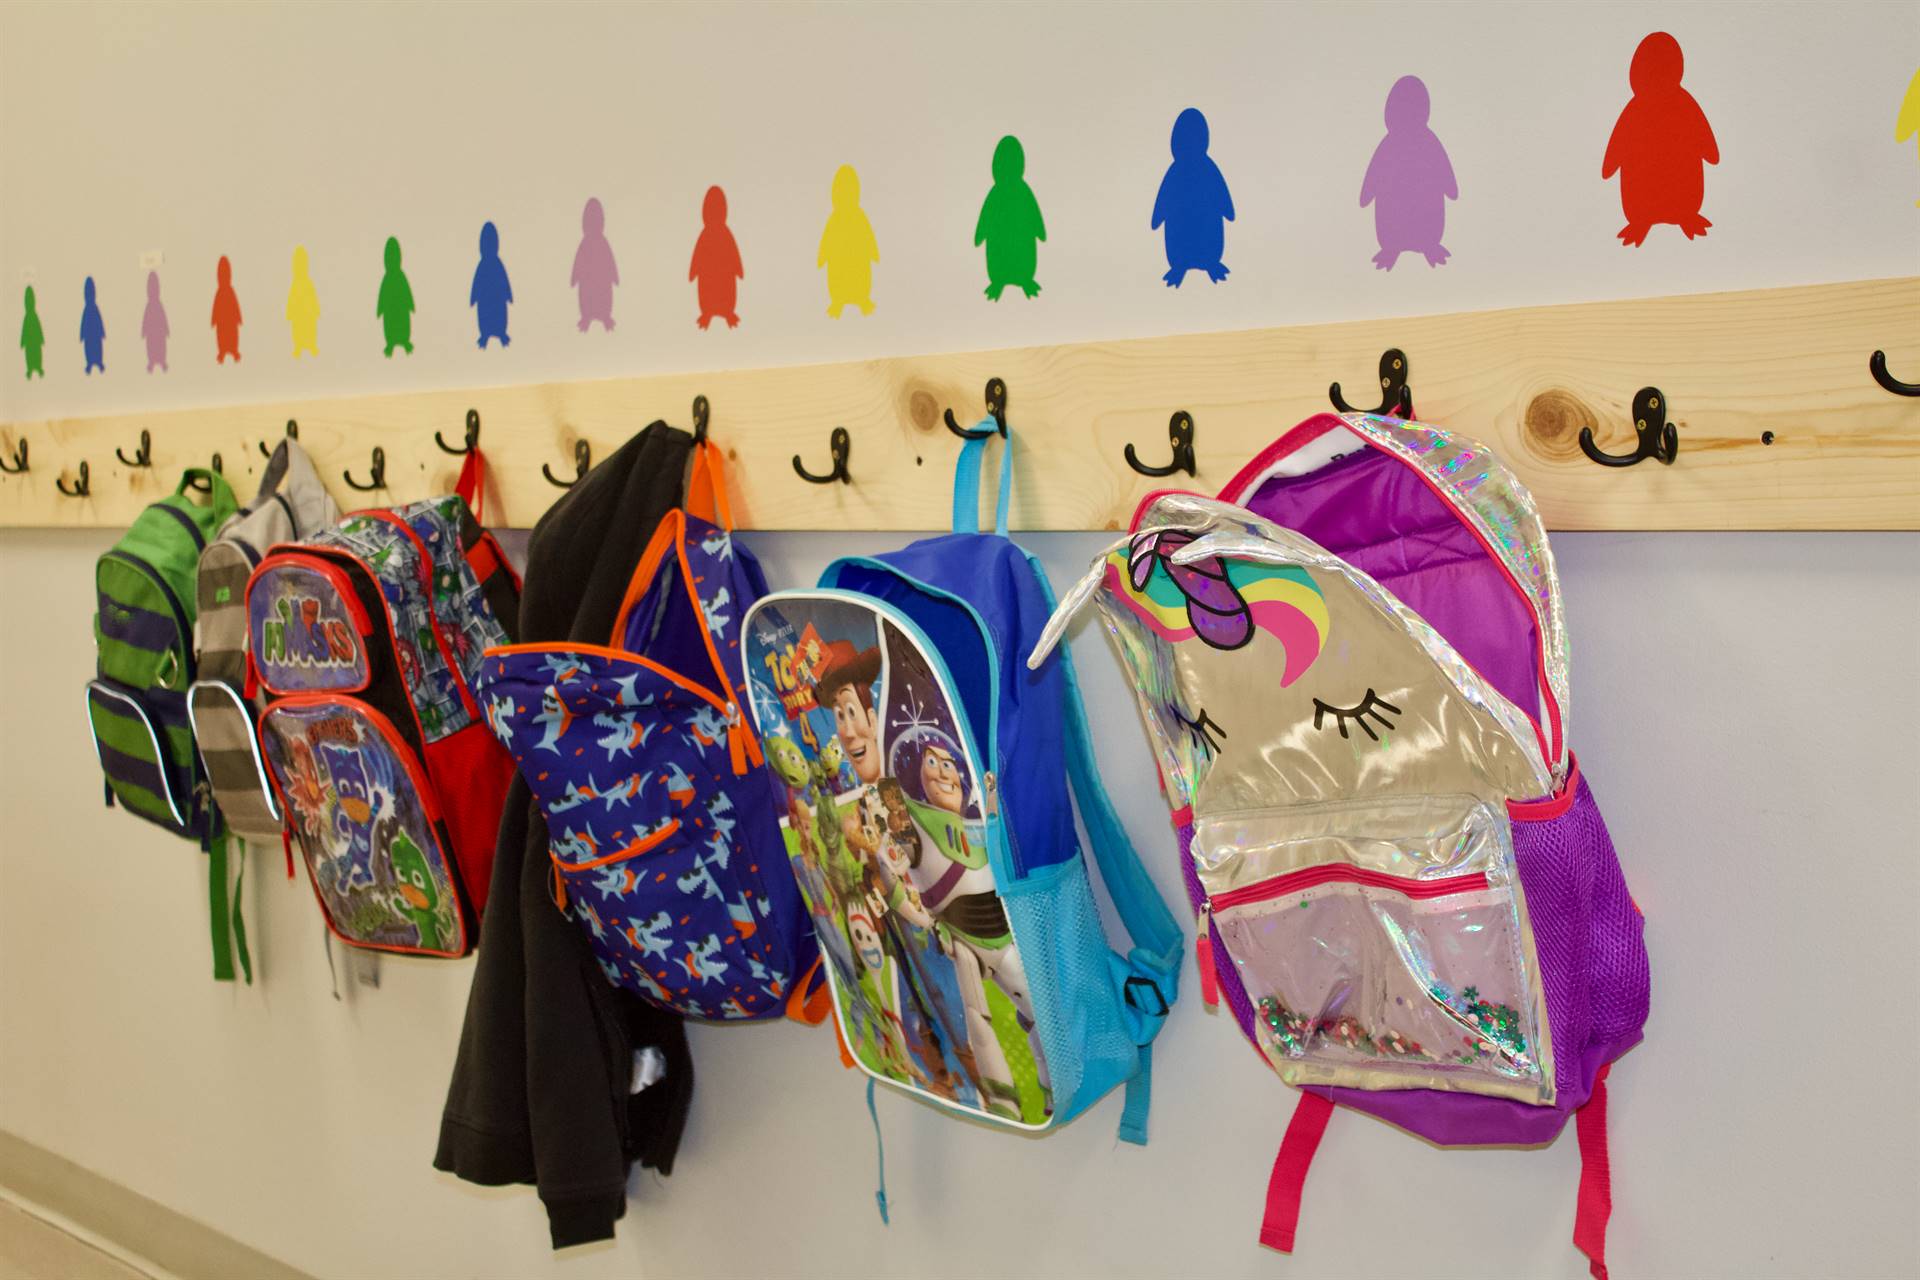 backpacks hanging on the wall